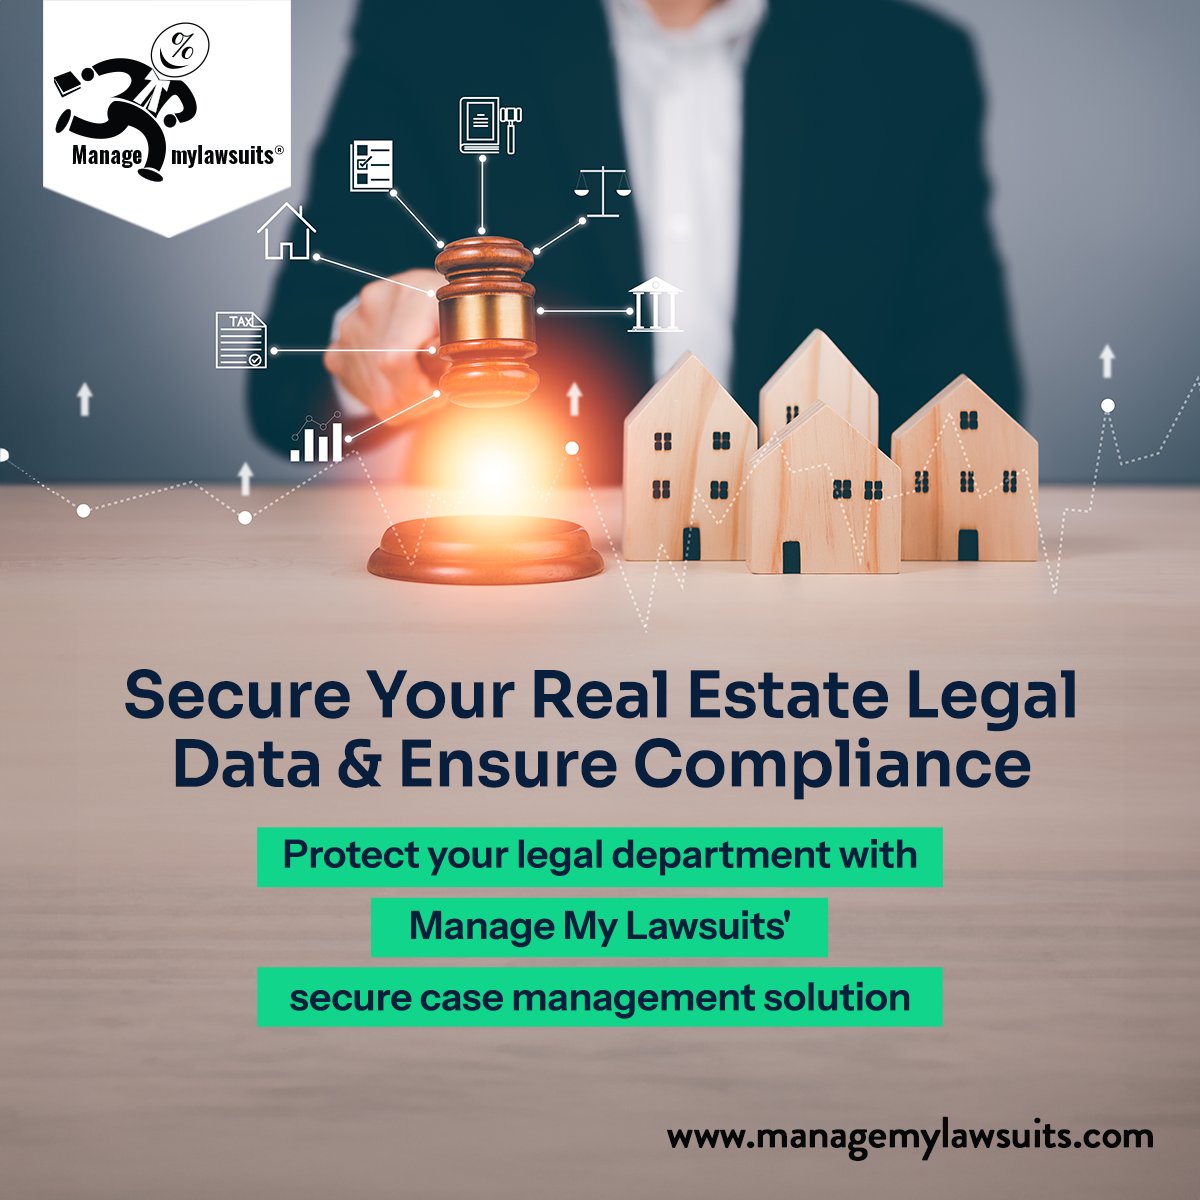 Securing real estate legal data is paramount. Manage My Lawsuits case management software provides robust protection and ensures compliance. Experience hassle-free management while safeguarding sensitive information.

#managemylawsuits #realestate #legaldata #ensurecompliance